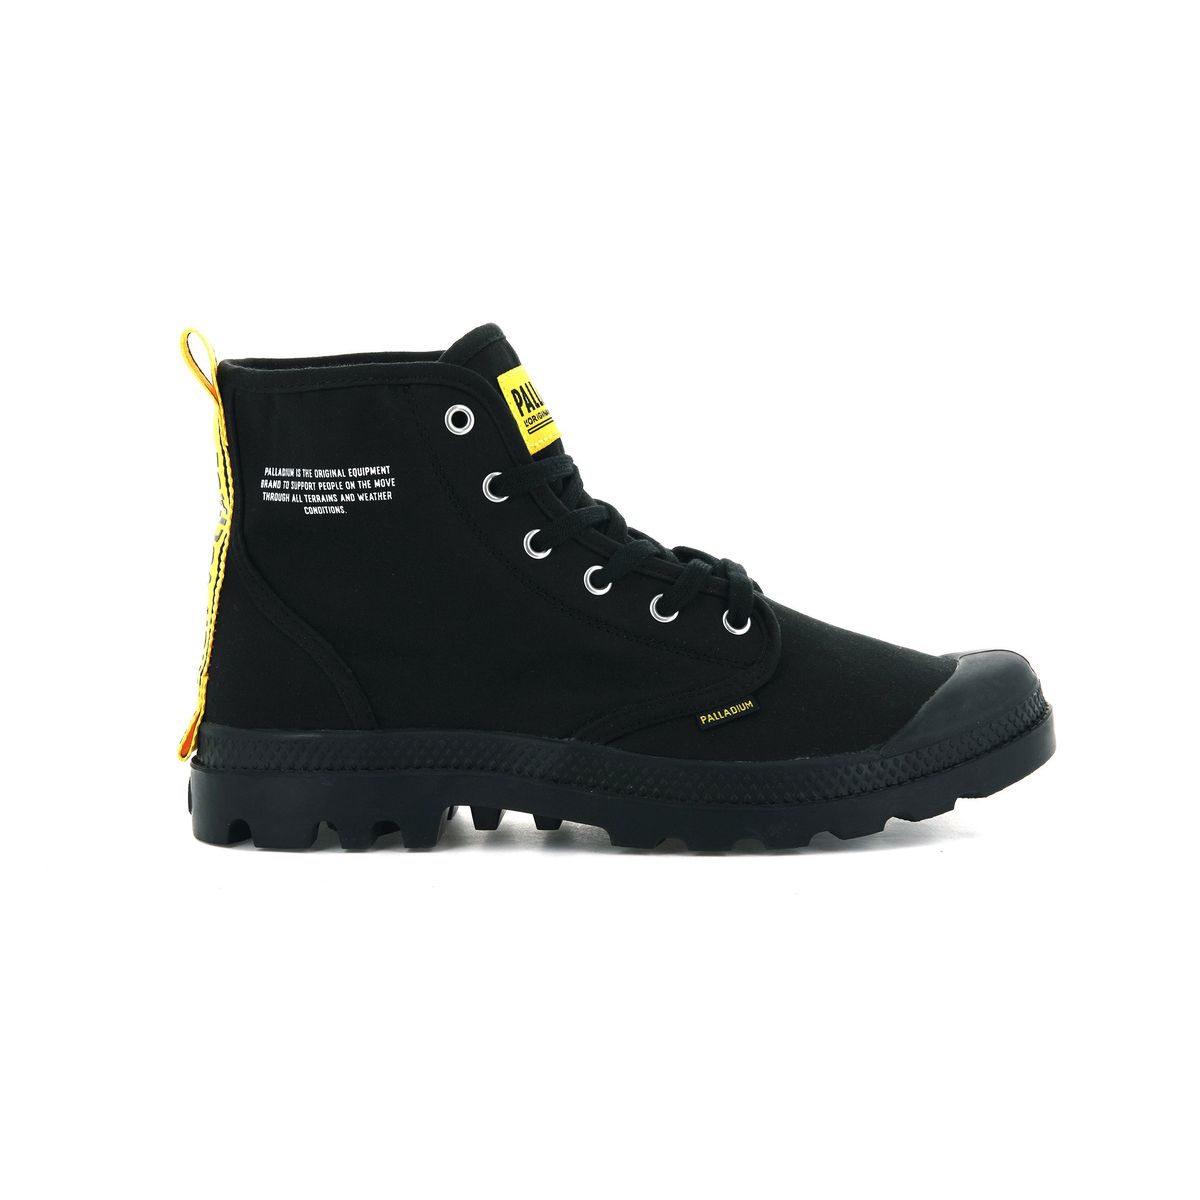 Boots PAMPA HI DARE SAFETY